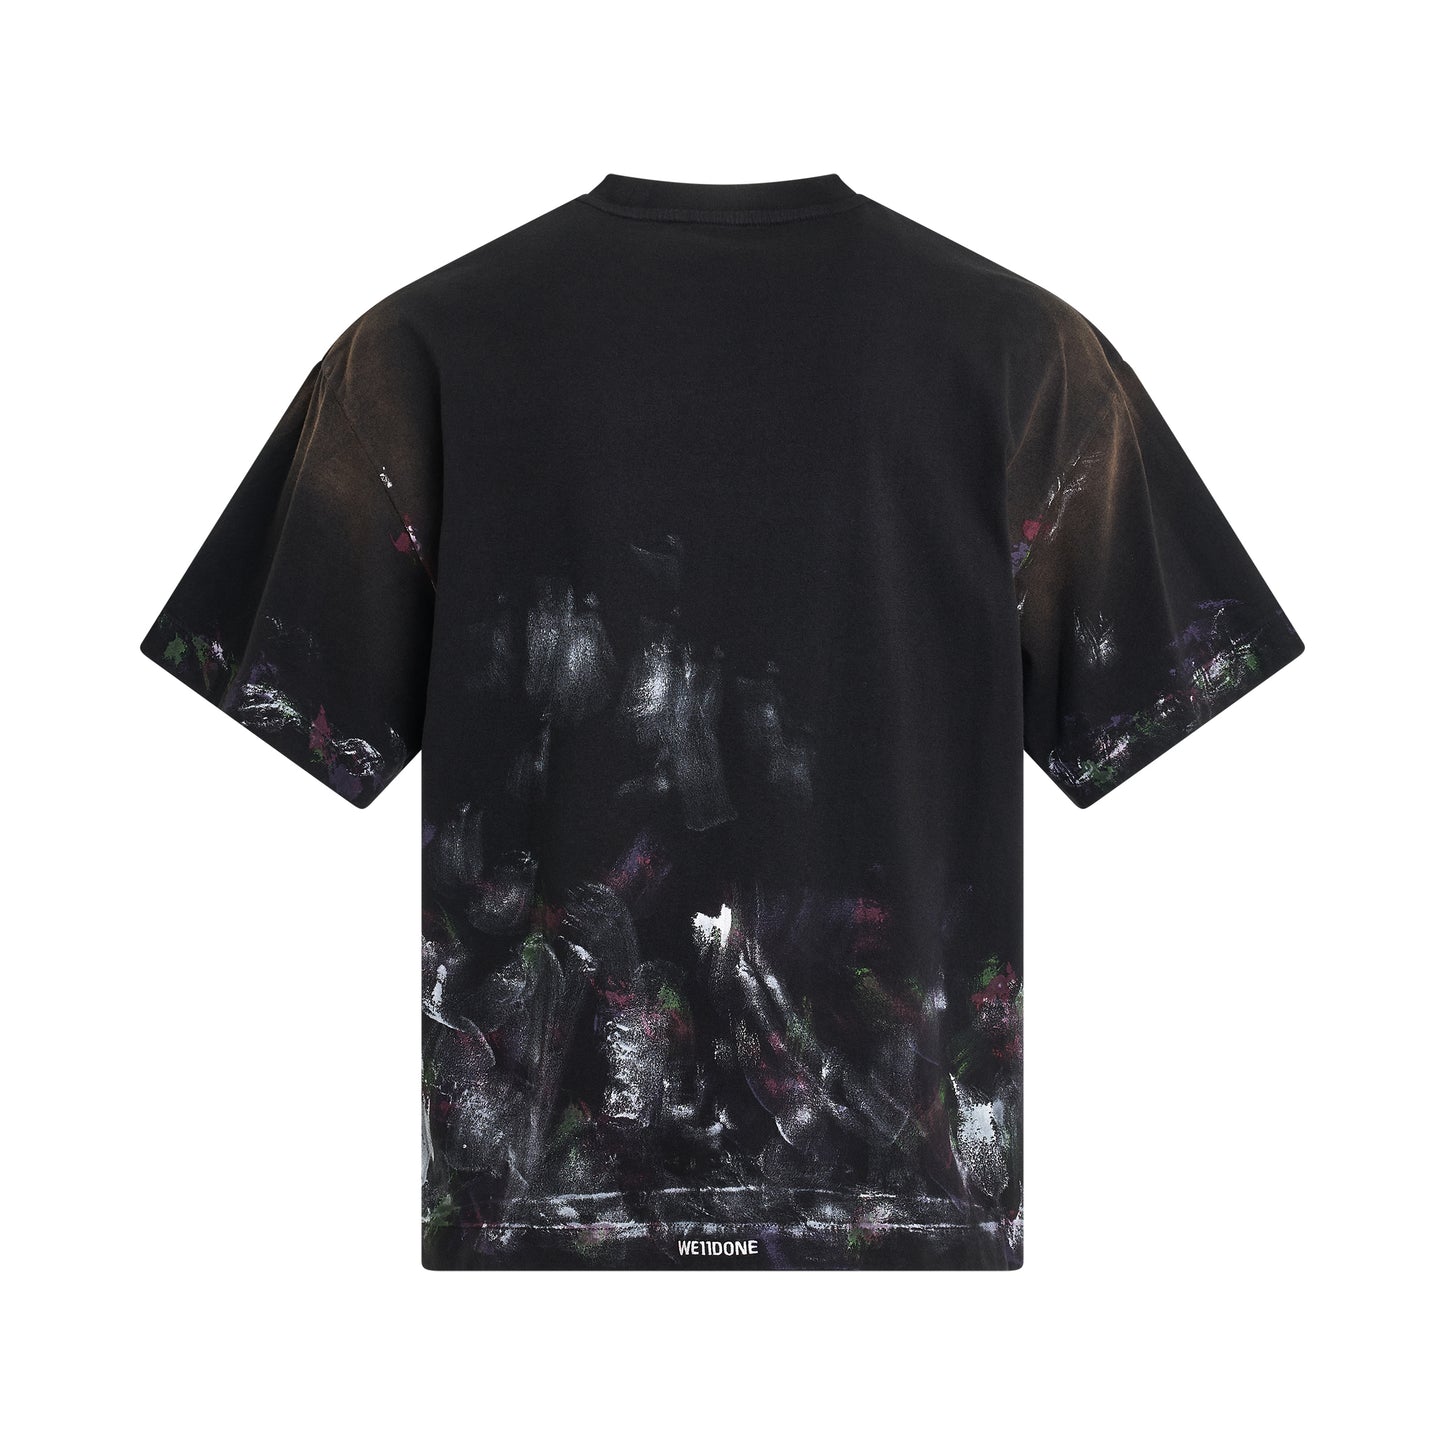 Multi-Coloured Painted T-Shirt in Black